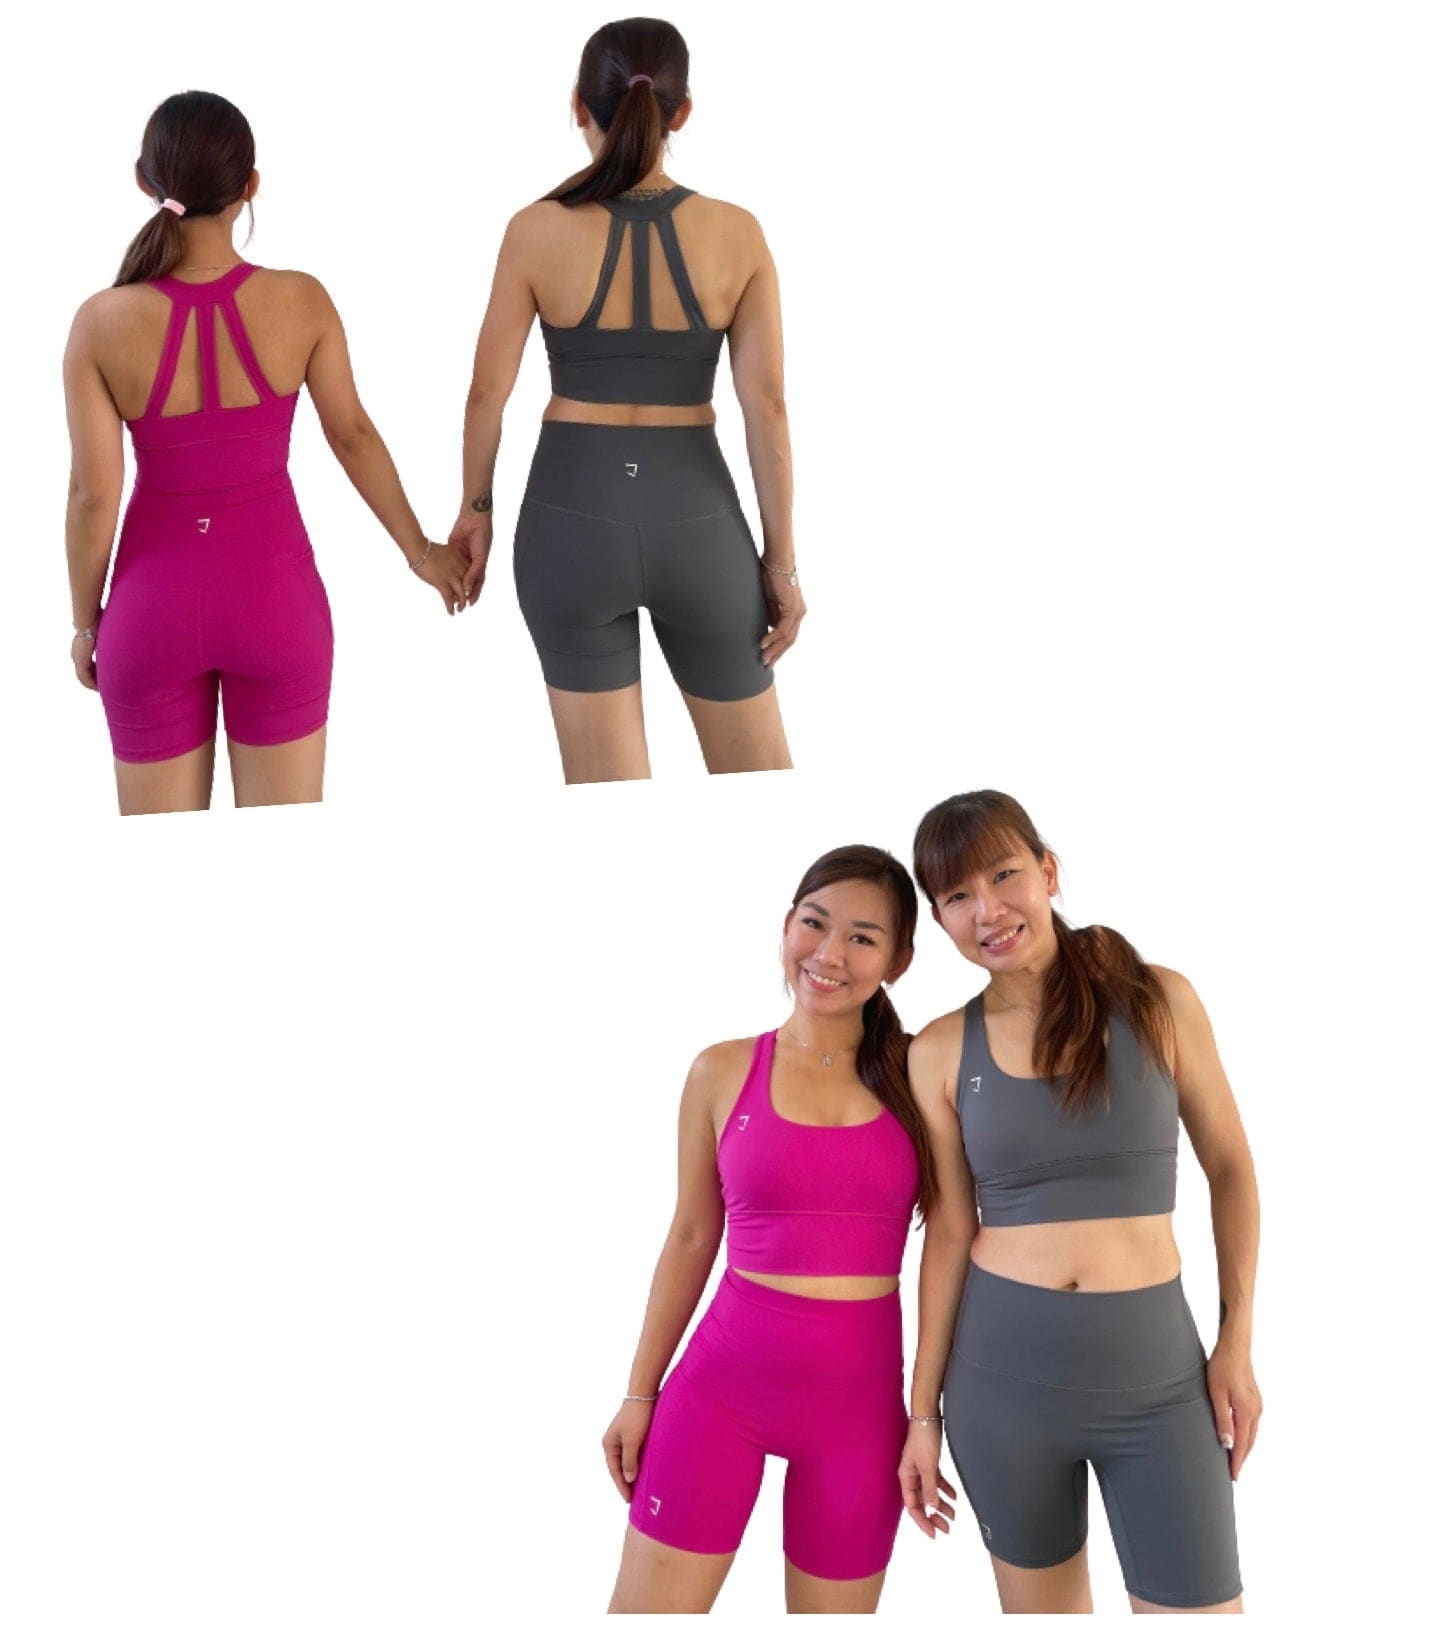 Energy trinity longline bra (to be paired with Energy seamless legging